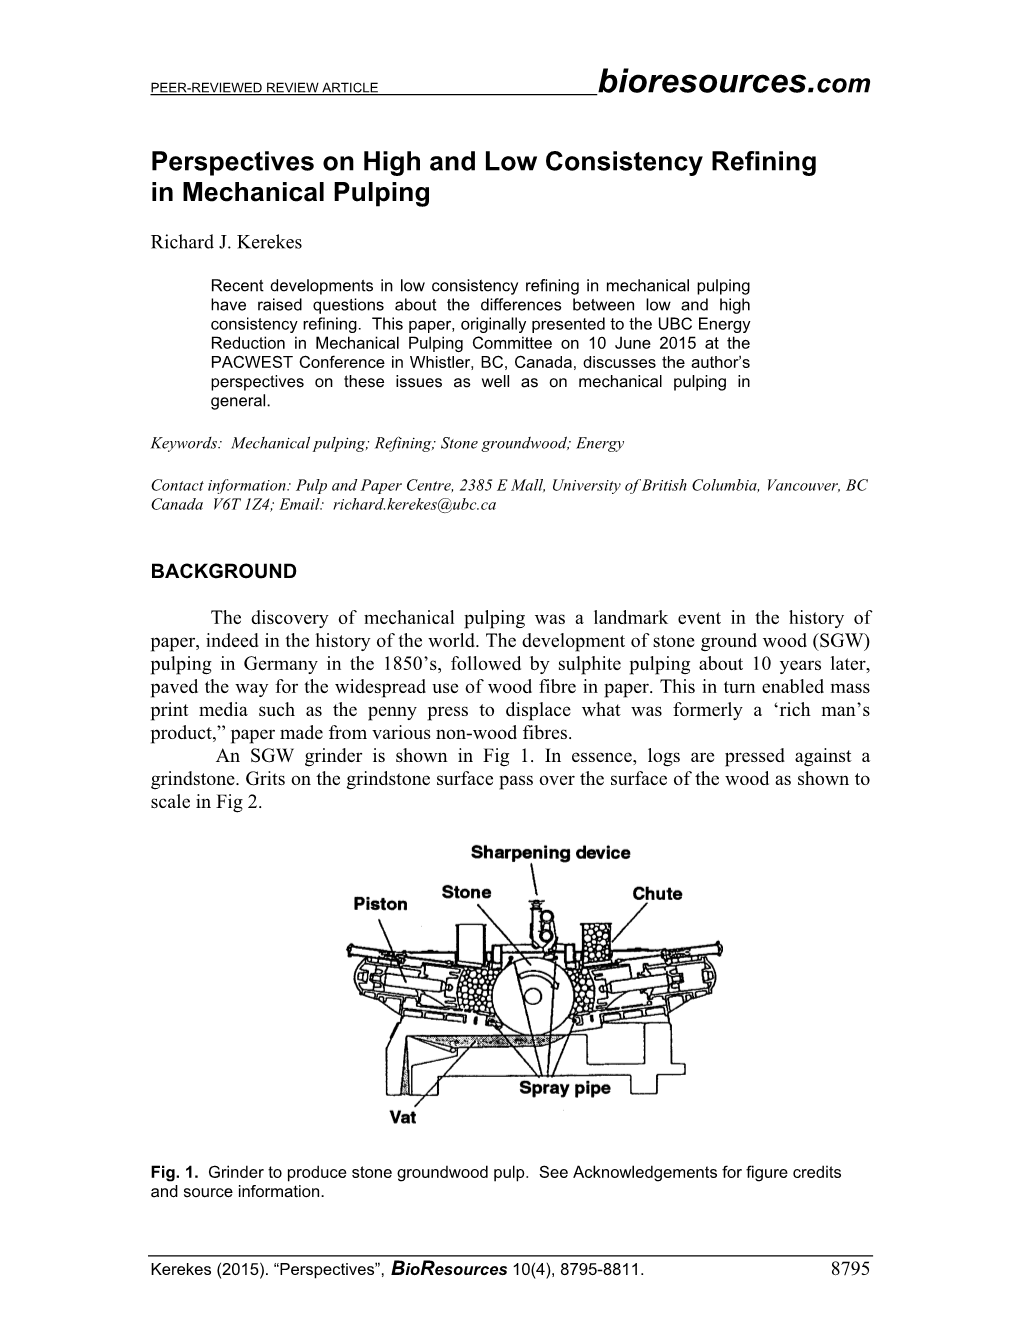 Perspectives on High and Low Consistency Refining in Mechanical Pulping